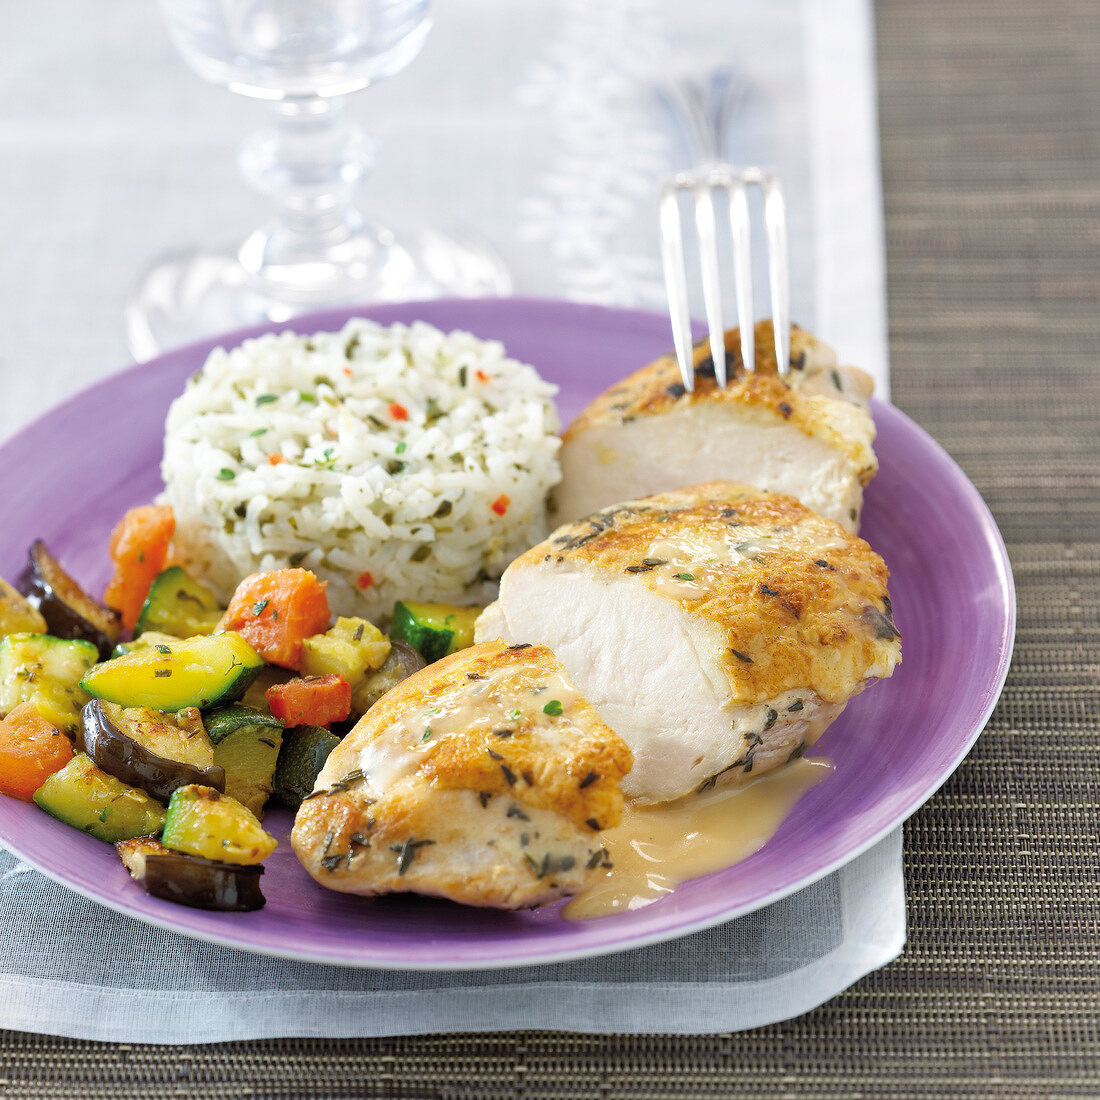 Roasted chicken breast with thyme,ratatouille and white rice with herbs